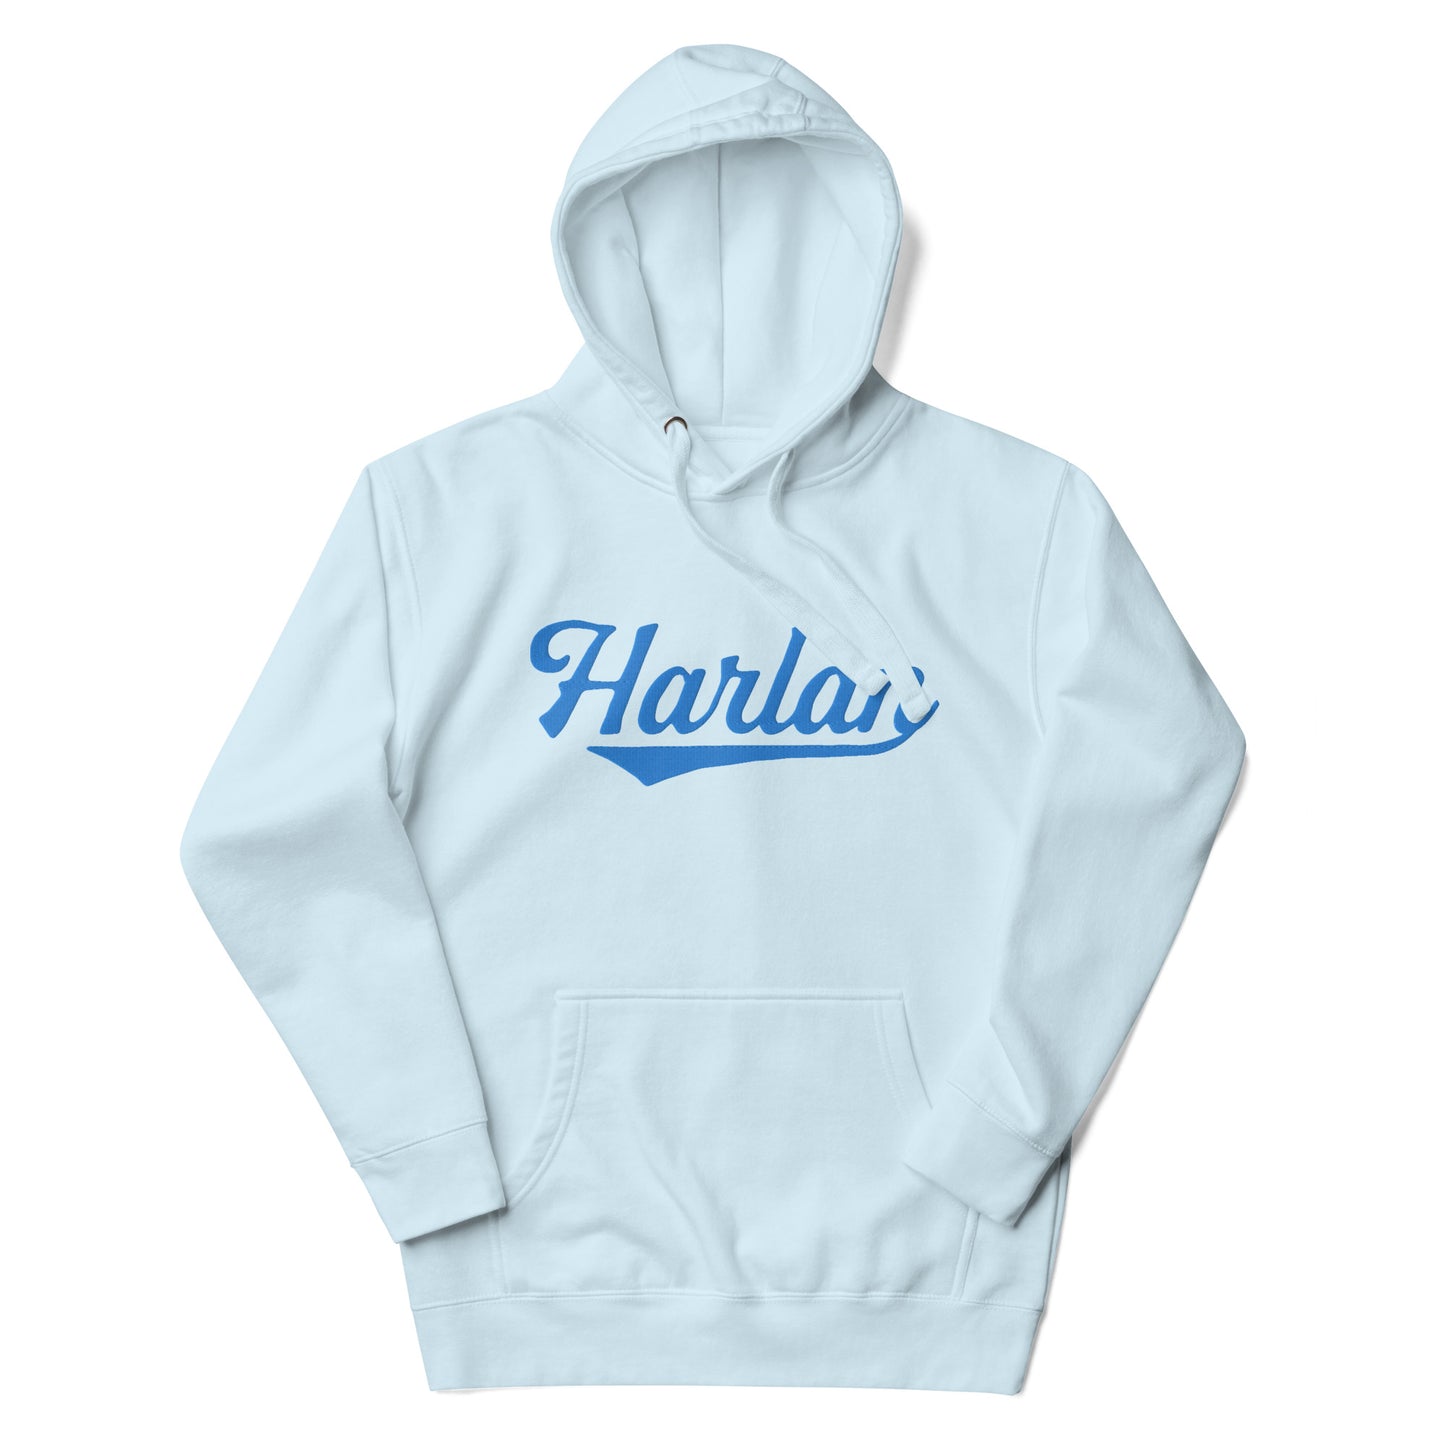 Embroidered Harland Hoodie | Harlan Falcons